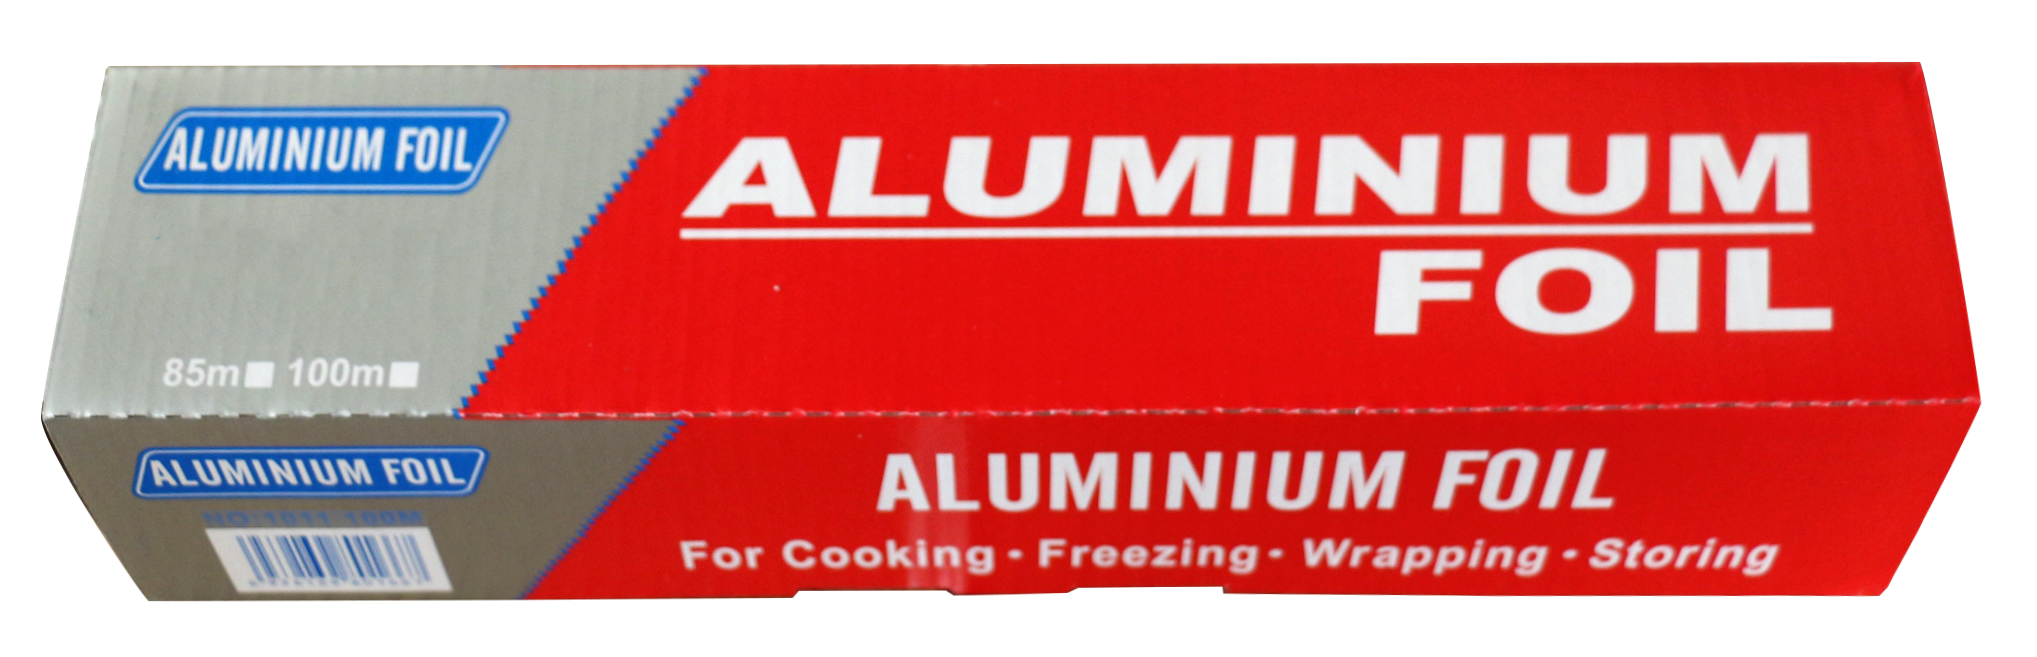 Household Aluminum Foil 8011 8006 1235 with Customized Color Box